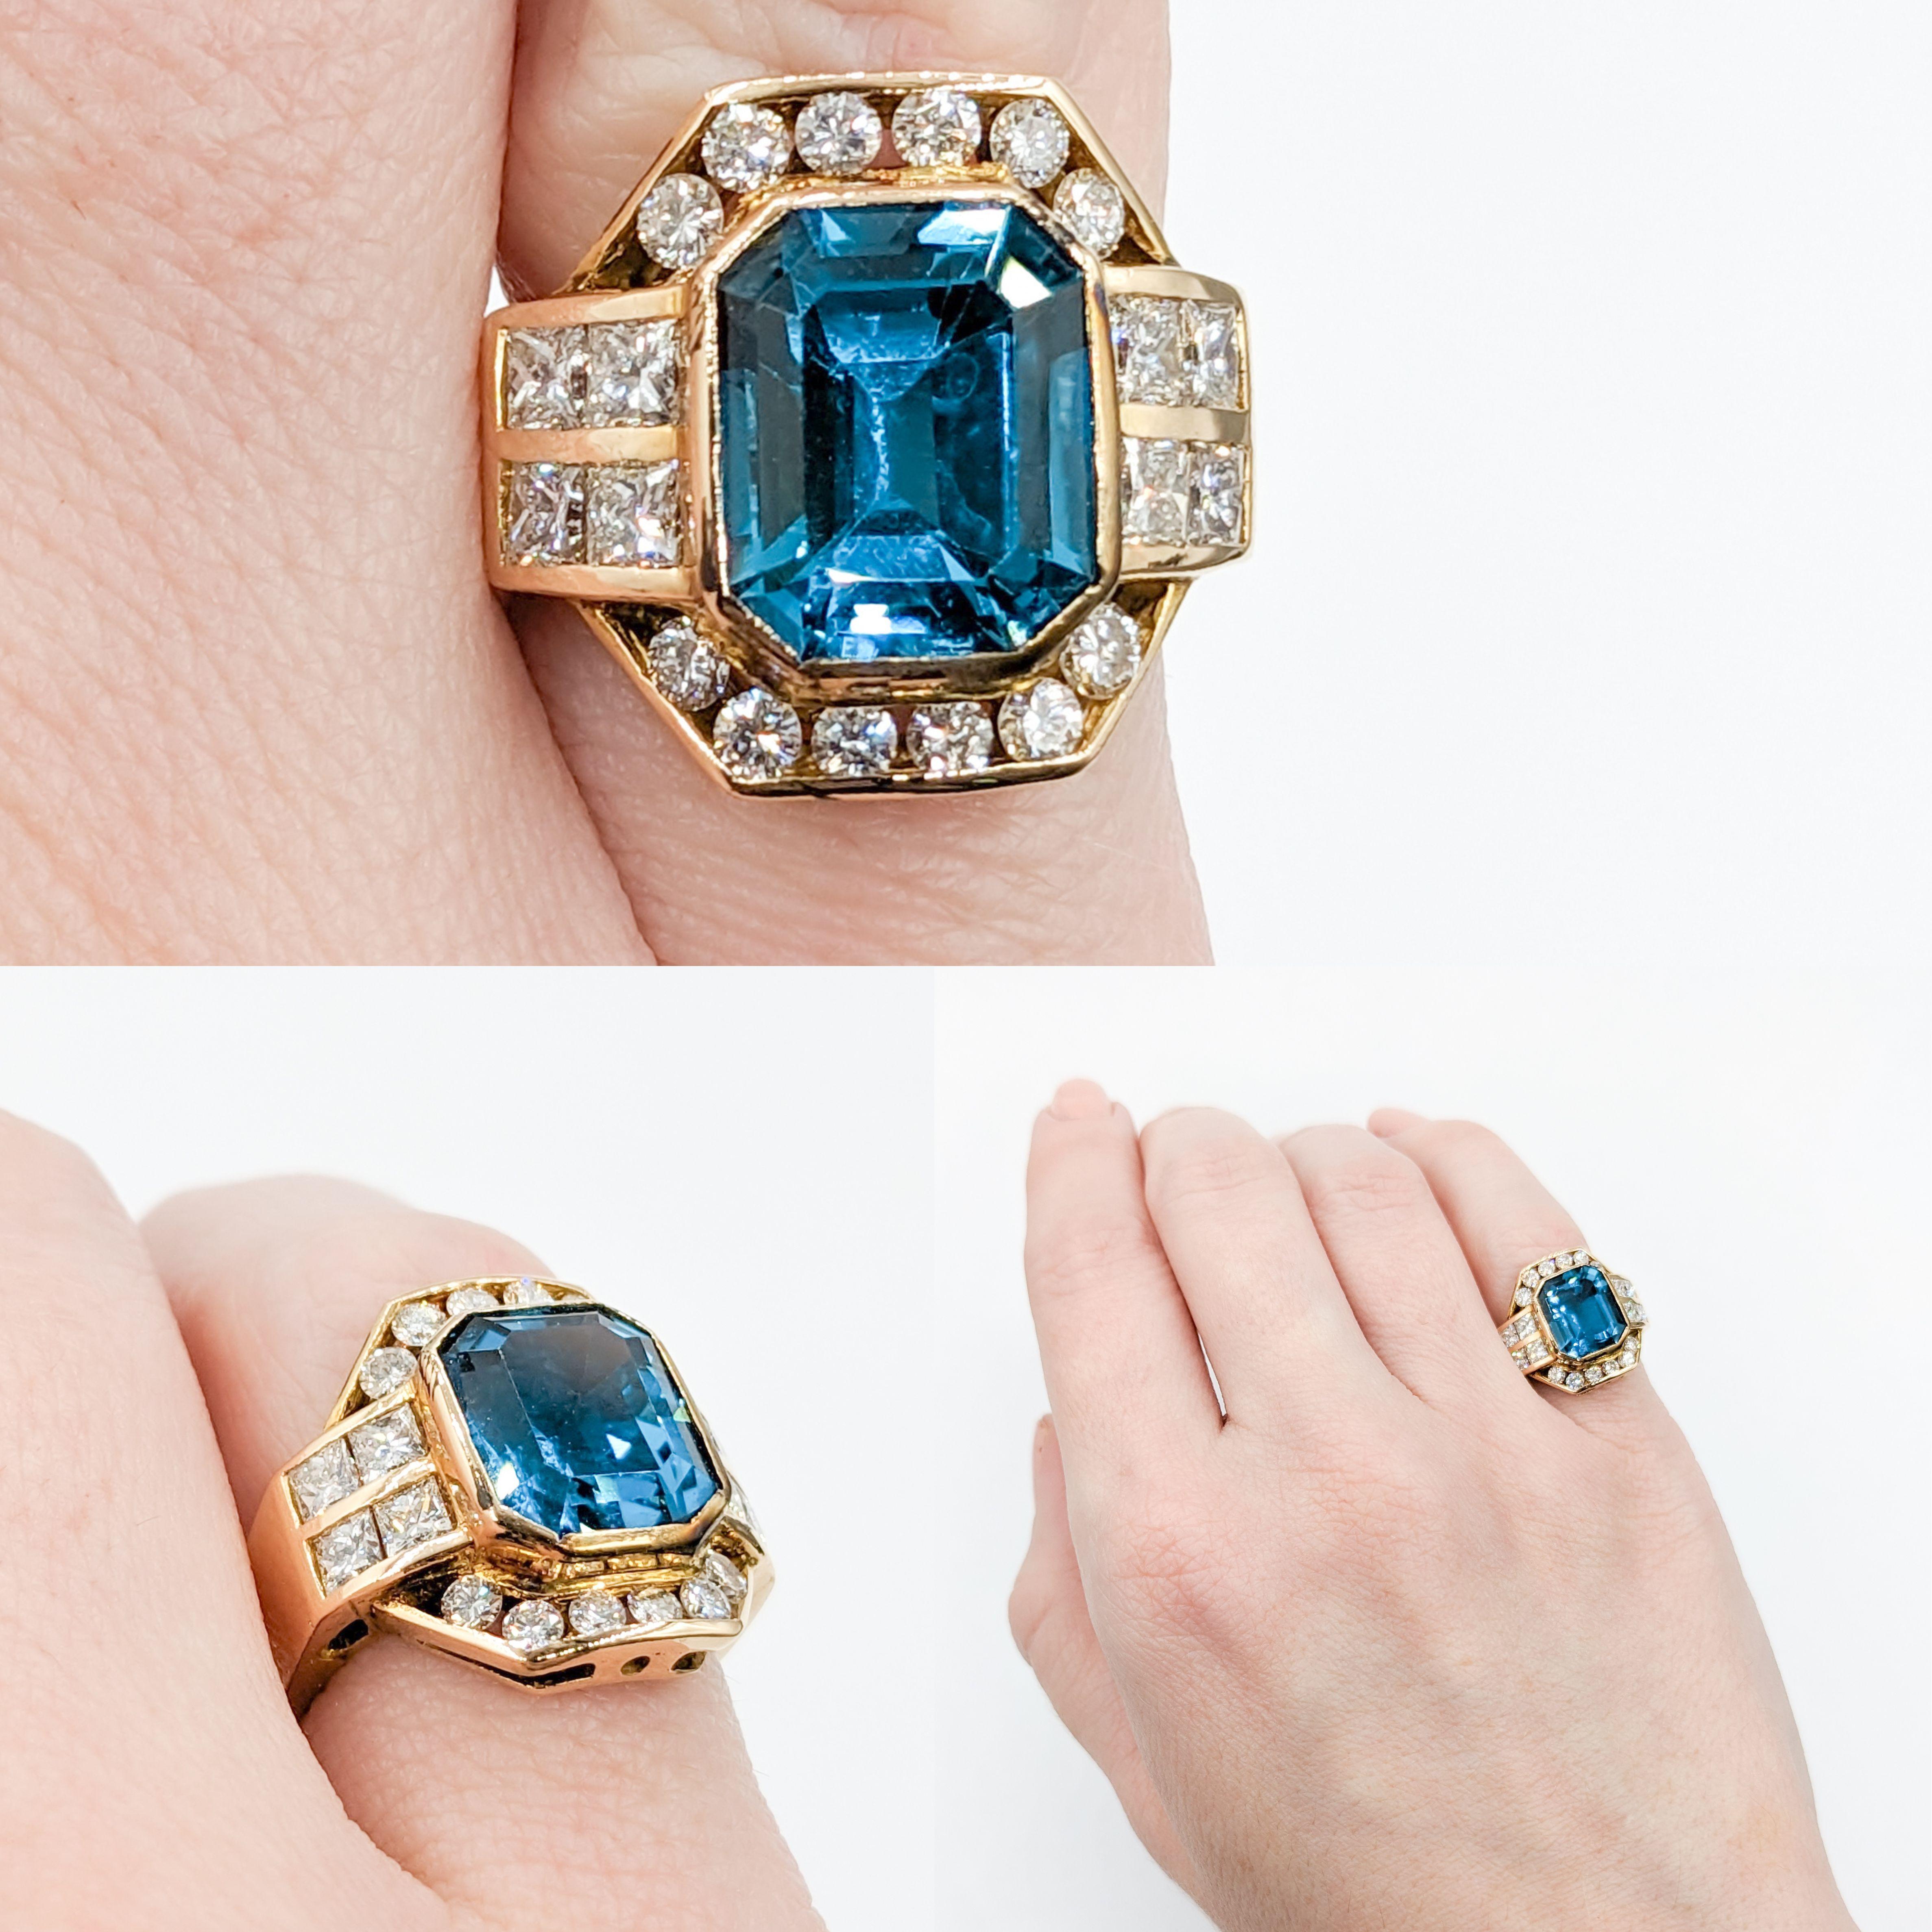 London Blue Topaz & Diamond Ring in 21k Gold

Crafted in 21k yellow gold, this elegant piece showcases a remarkable 1.0 carat total weight of round and princess cut diamonds, characterized by their sparkling brilliance, SI2 clarity, and G-H color.